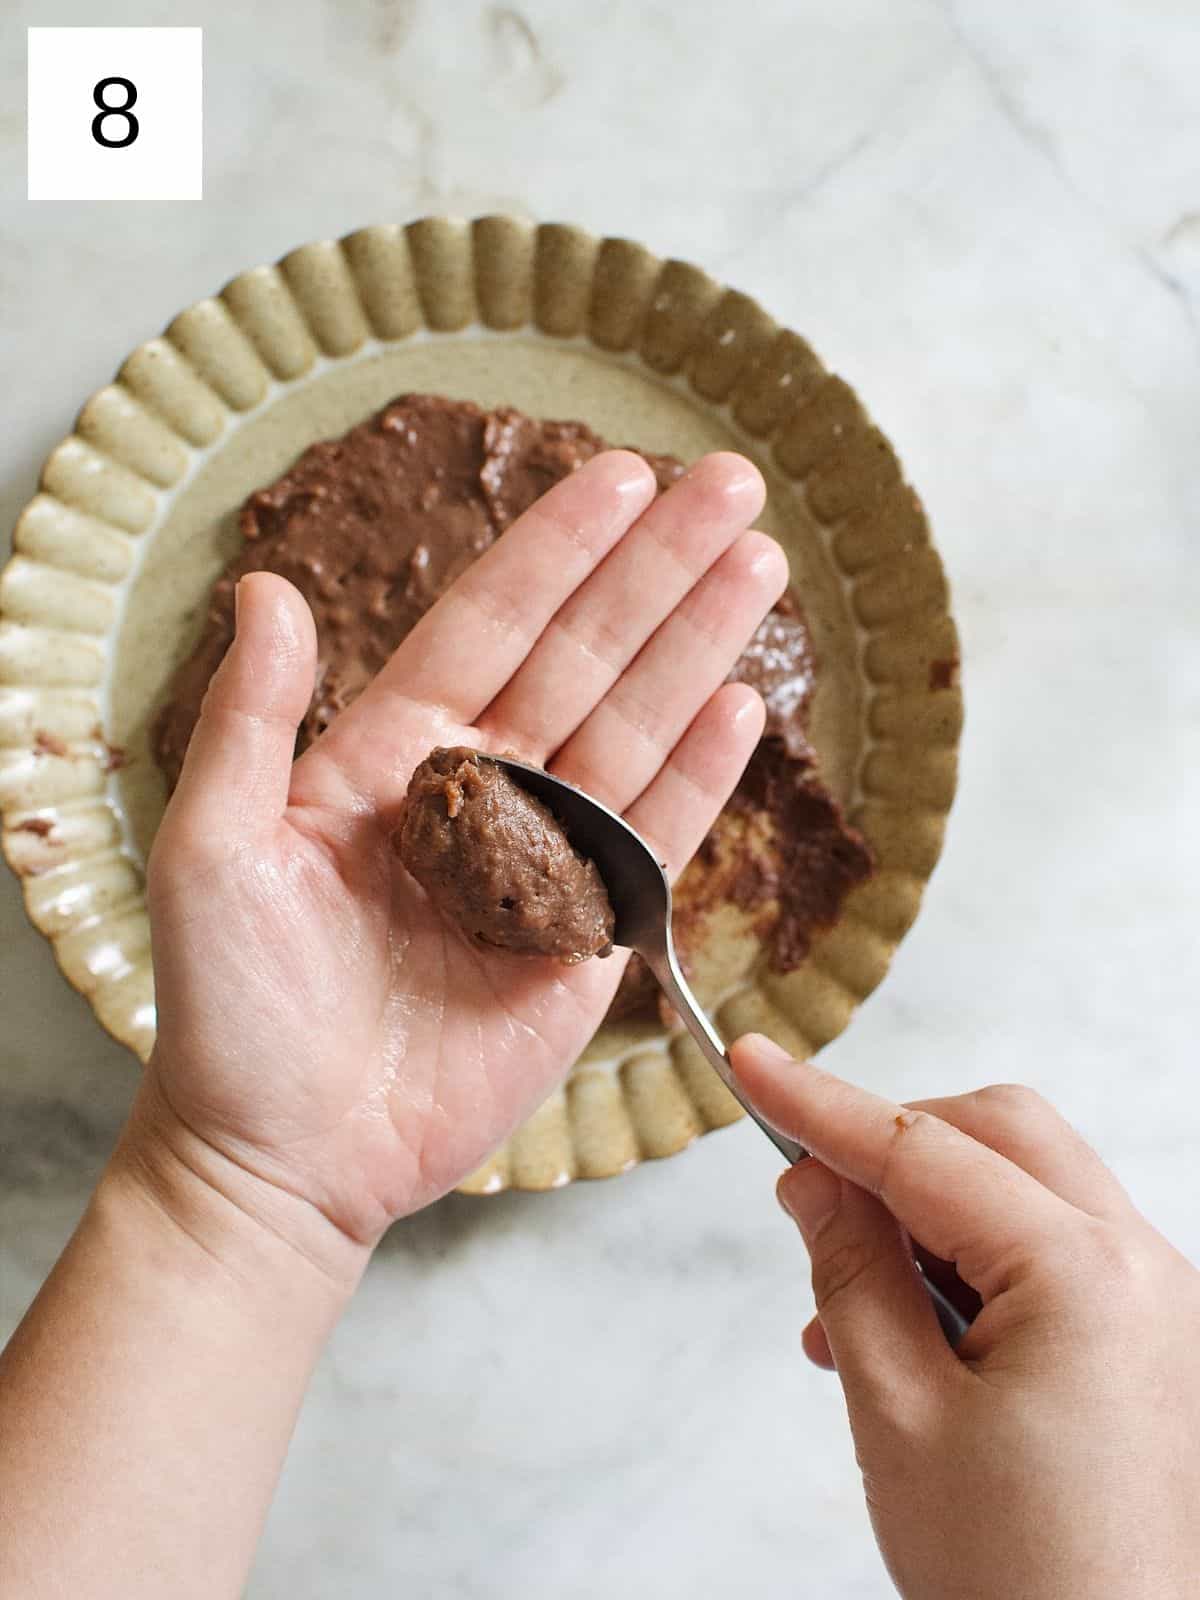 scooped portion of brigadeiro on greased hands.